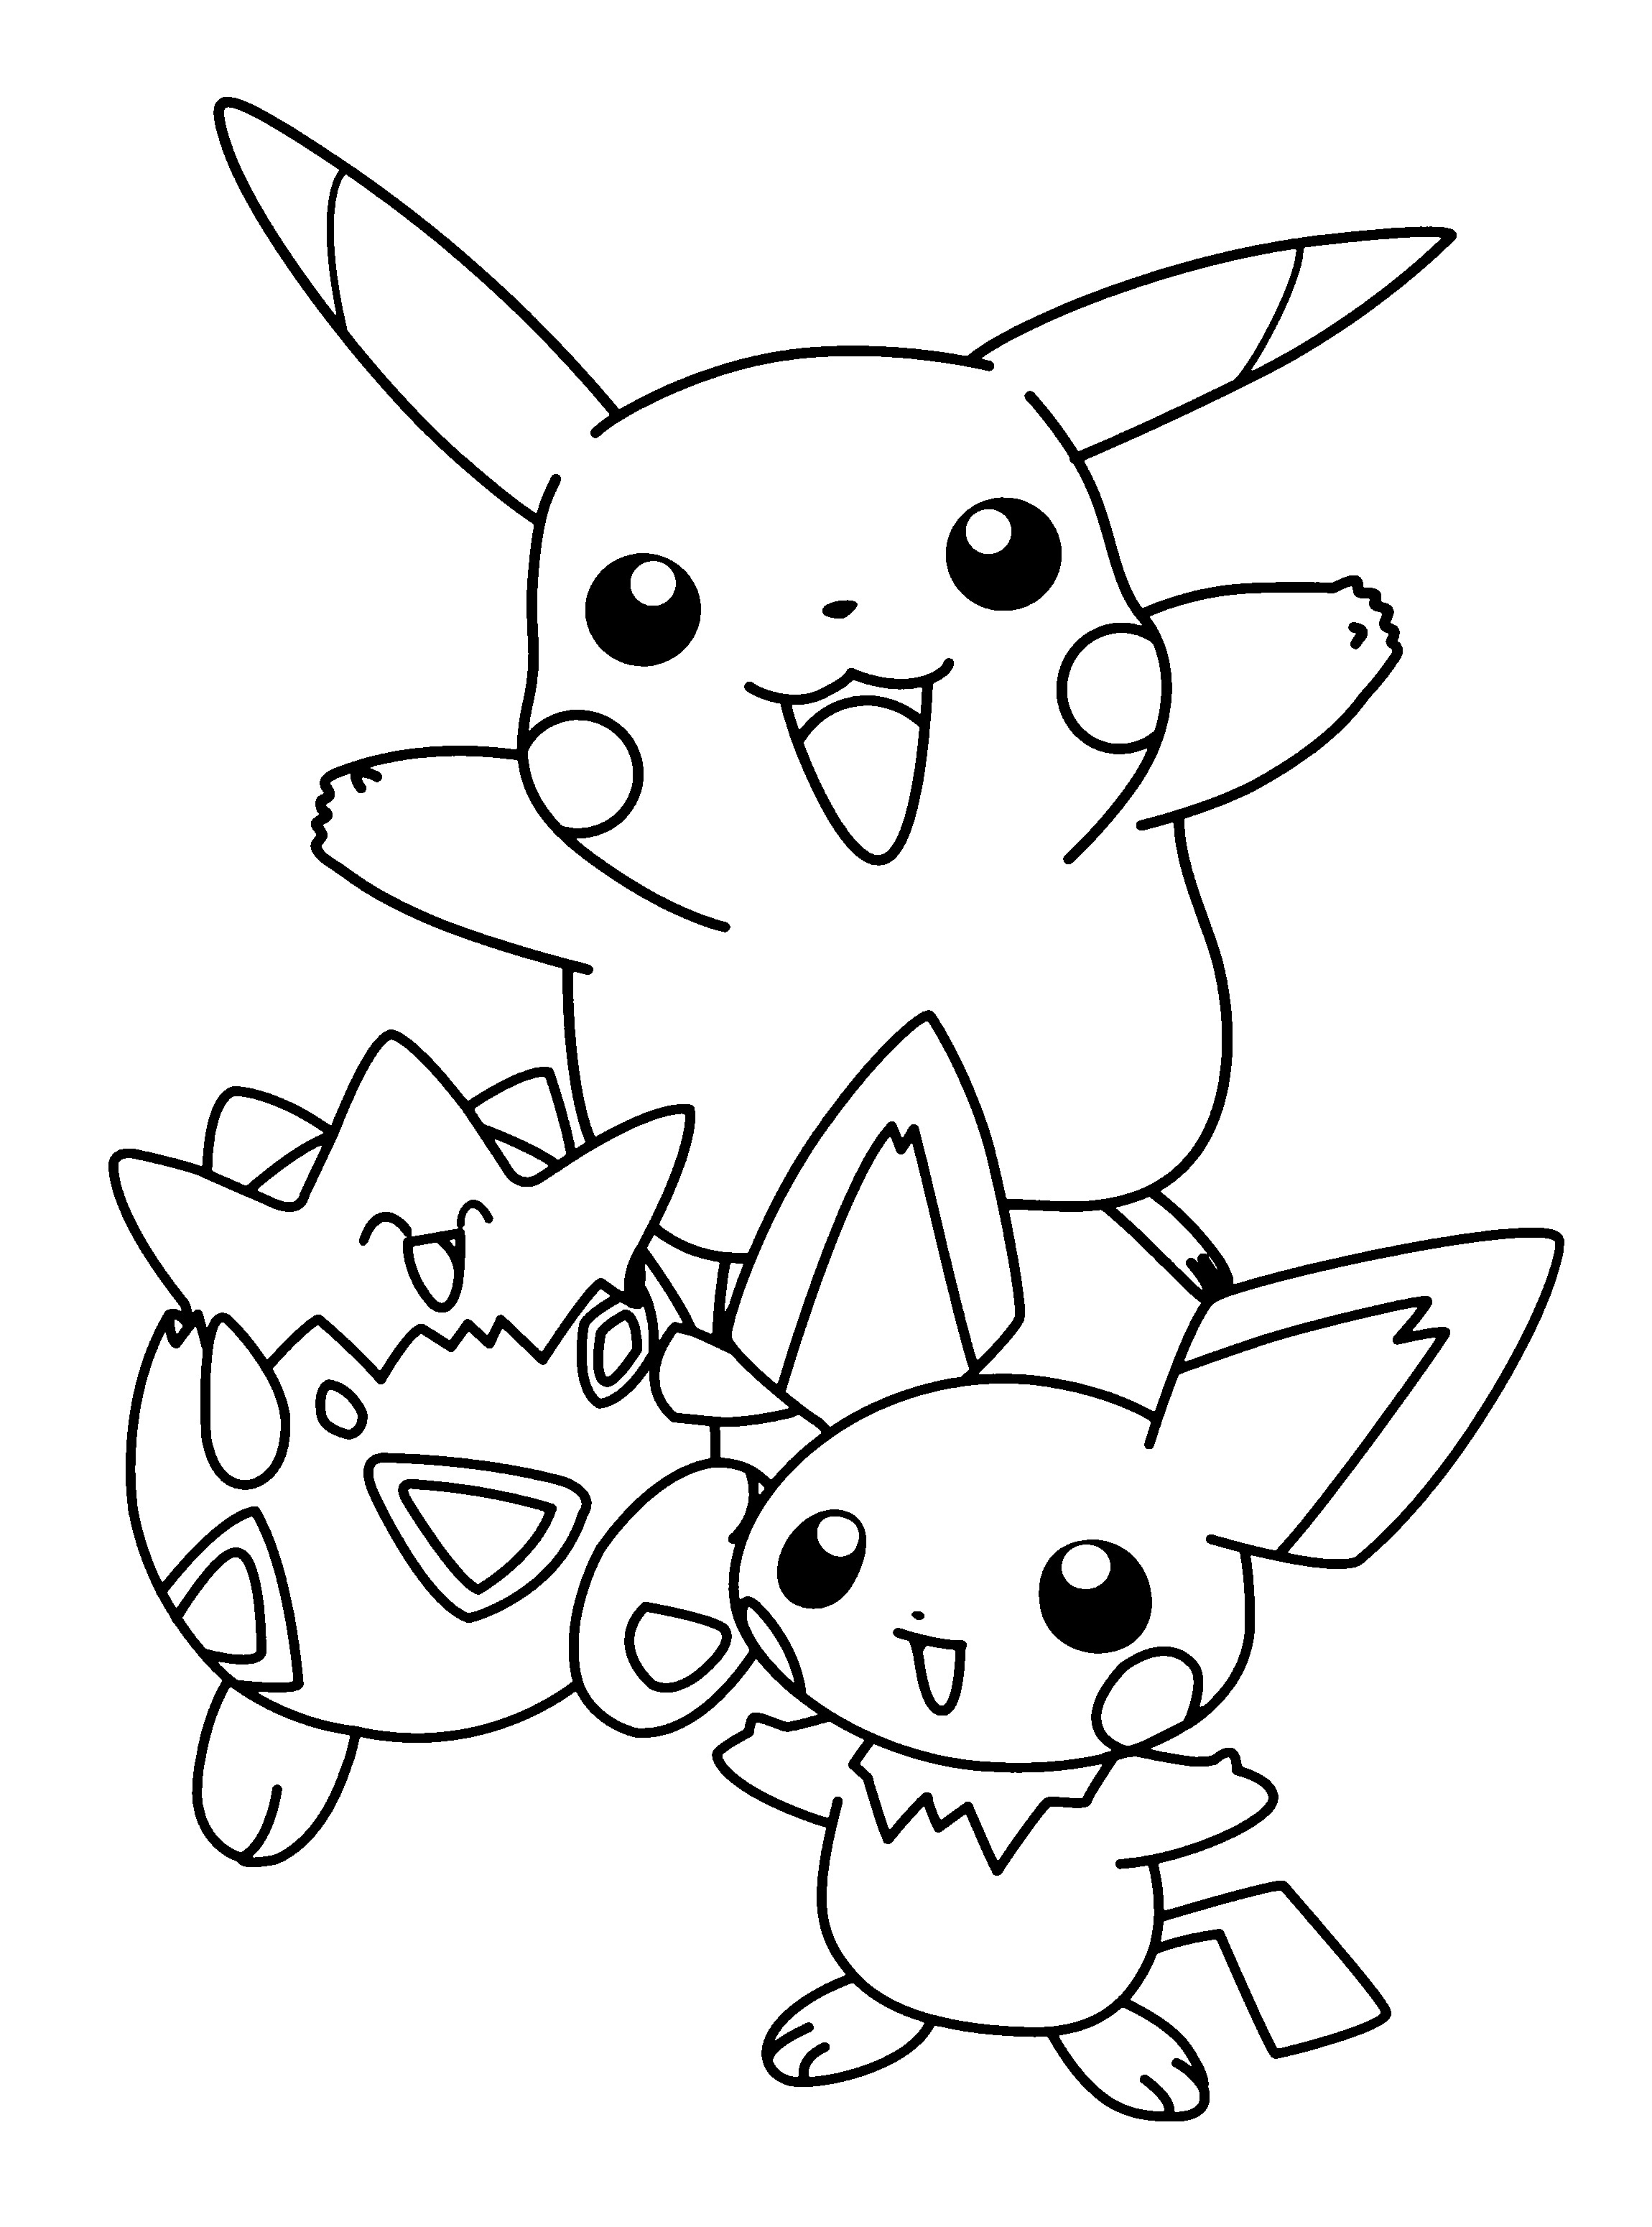 Charizard Coloring Pages Pikachu And Charizard Coloring Pages Bubakids